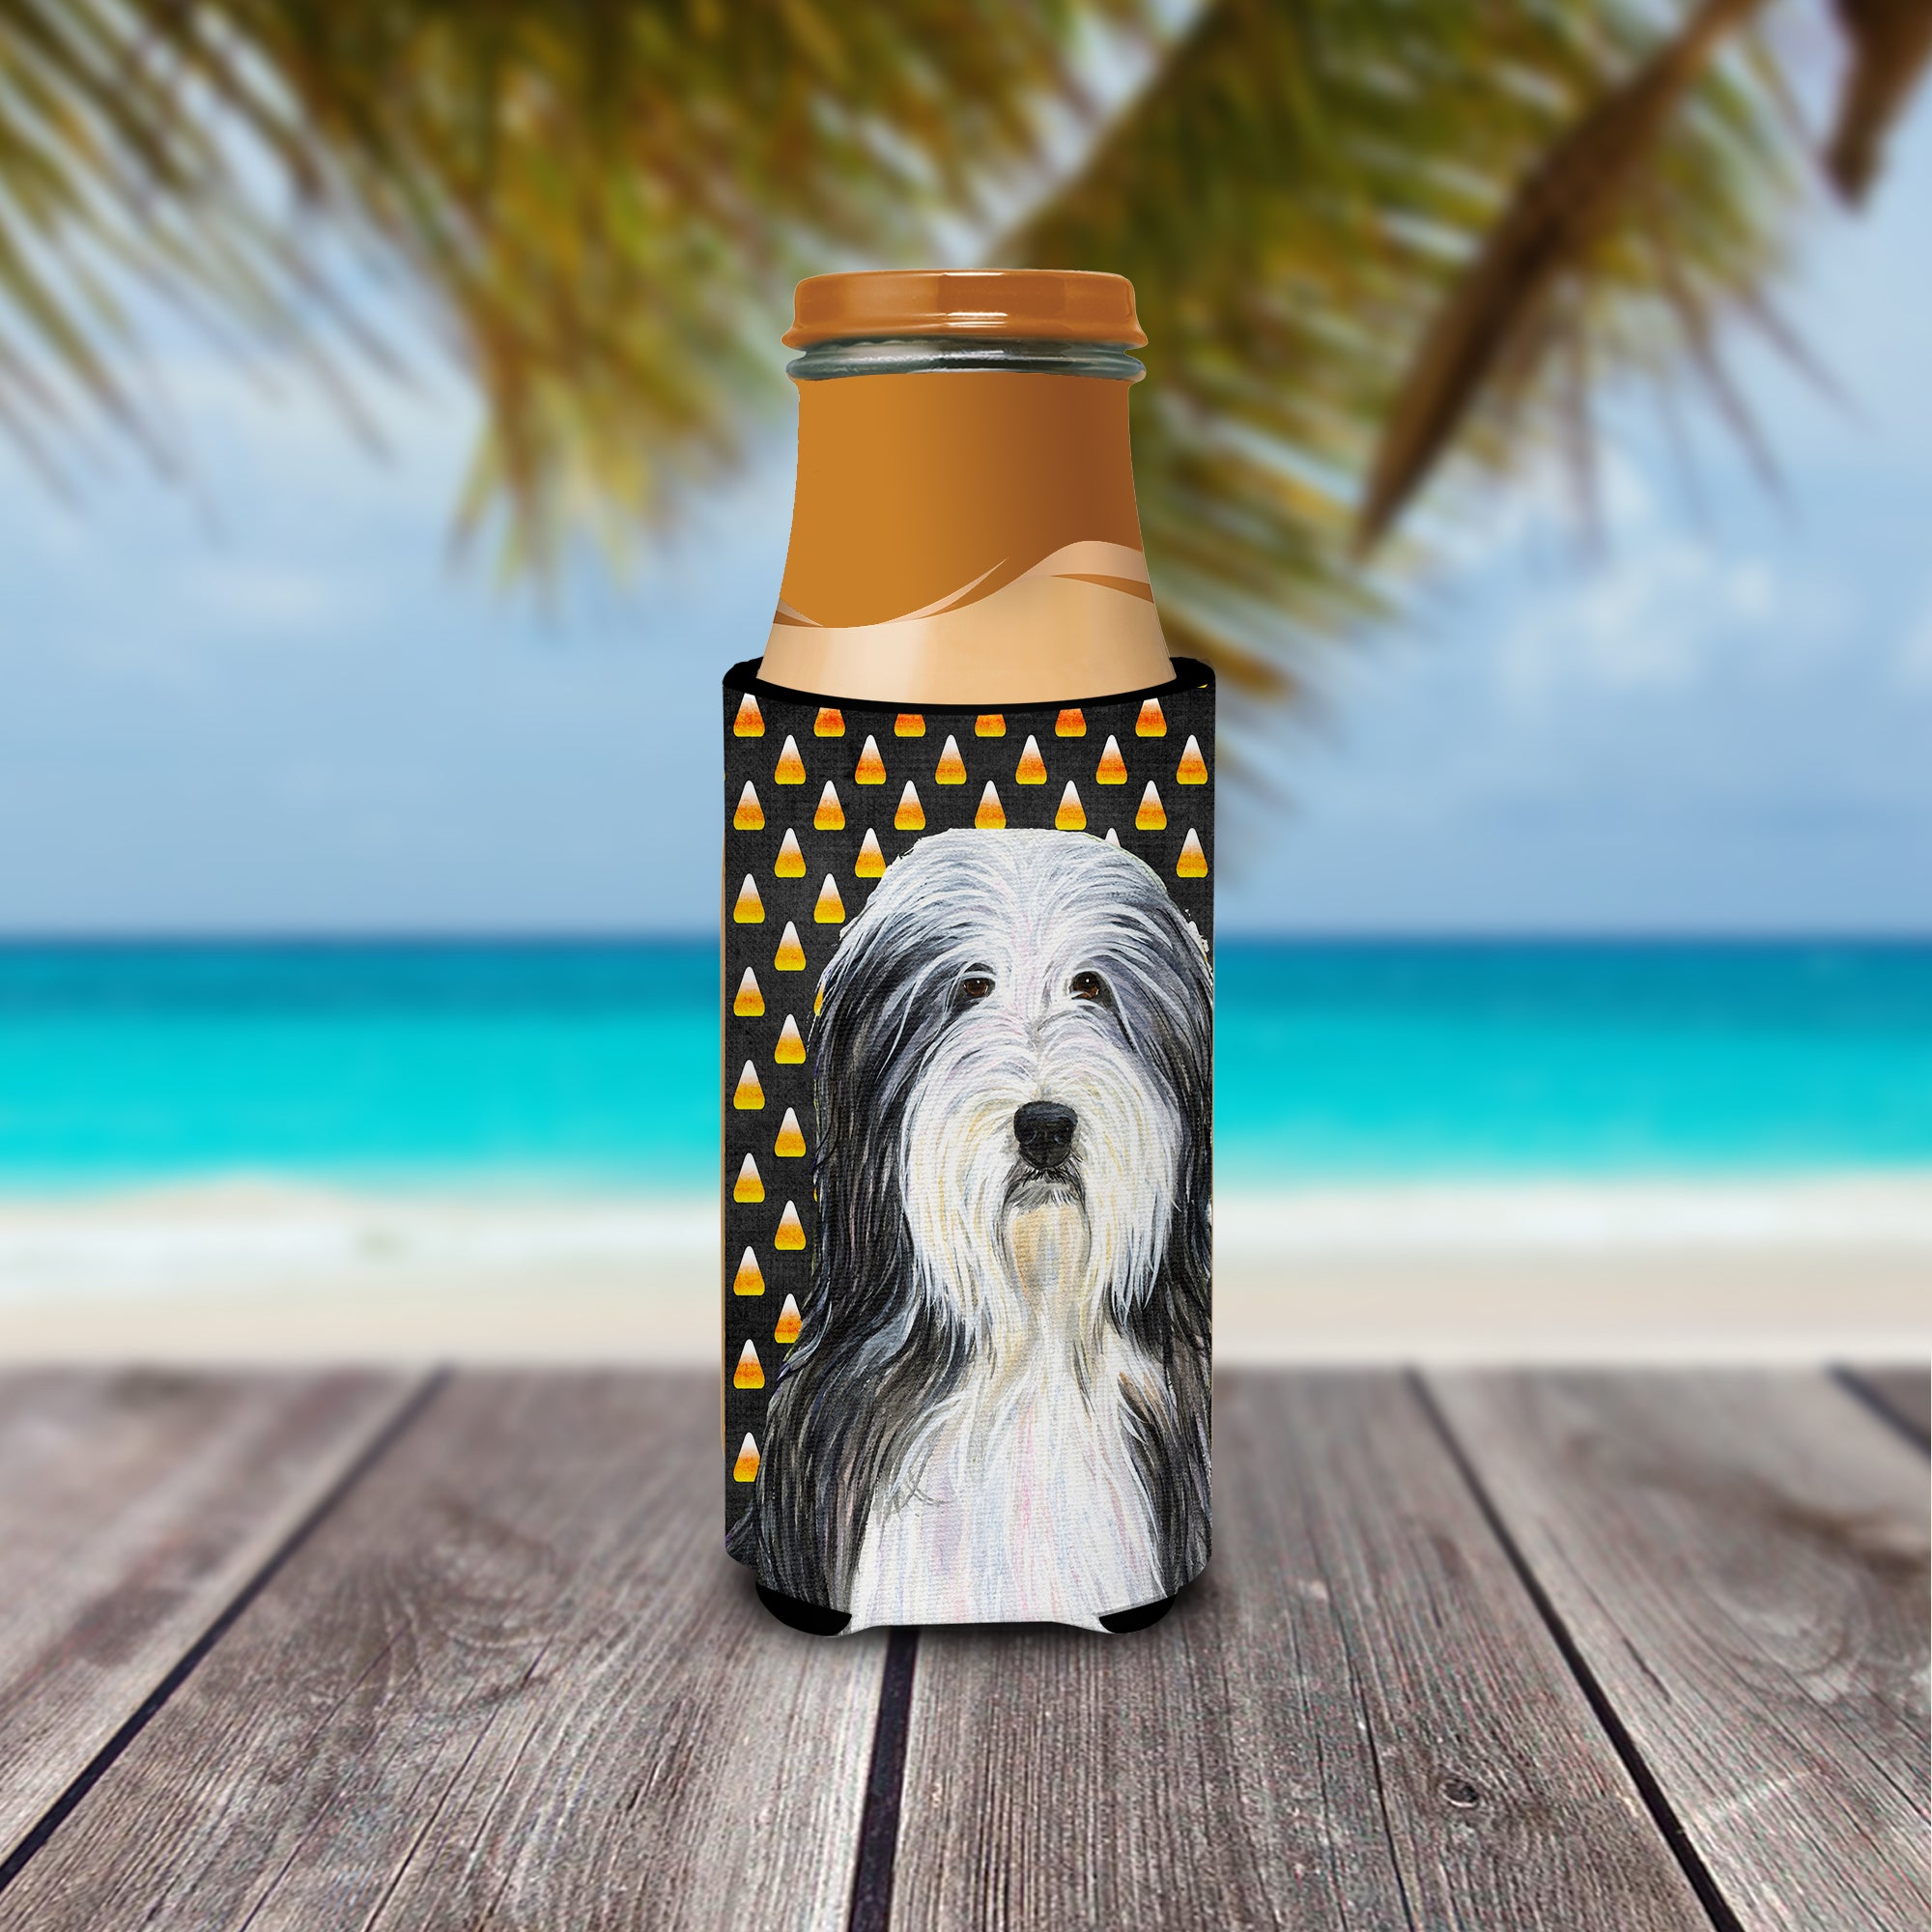 Bearded Collie Candy Corn Halloween Portrait Ultra Beverage Insulators for slim cans SS4290MUK.